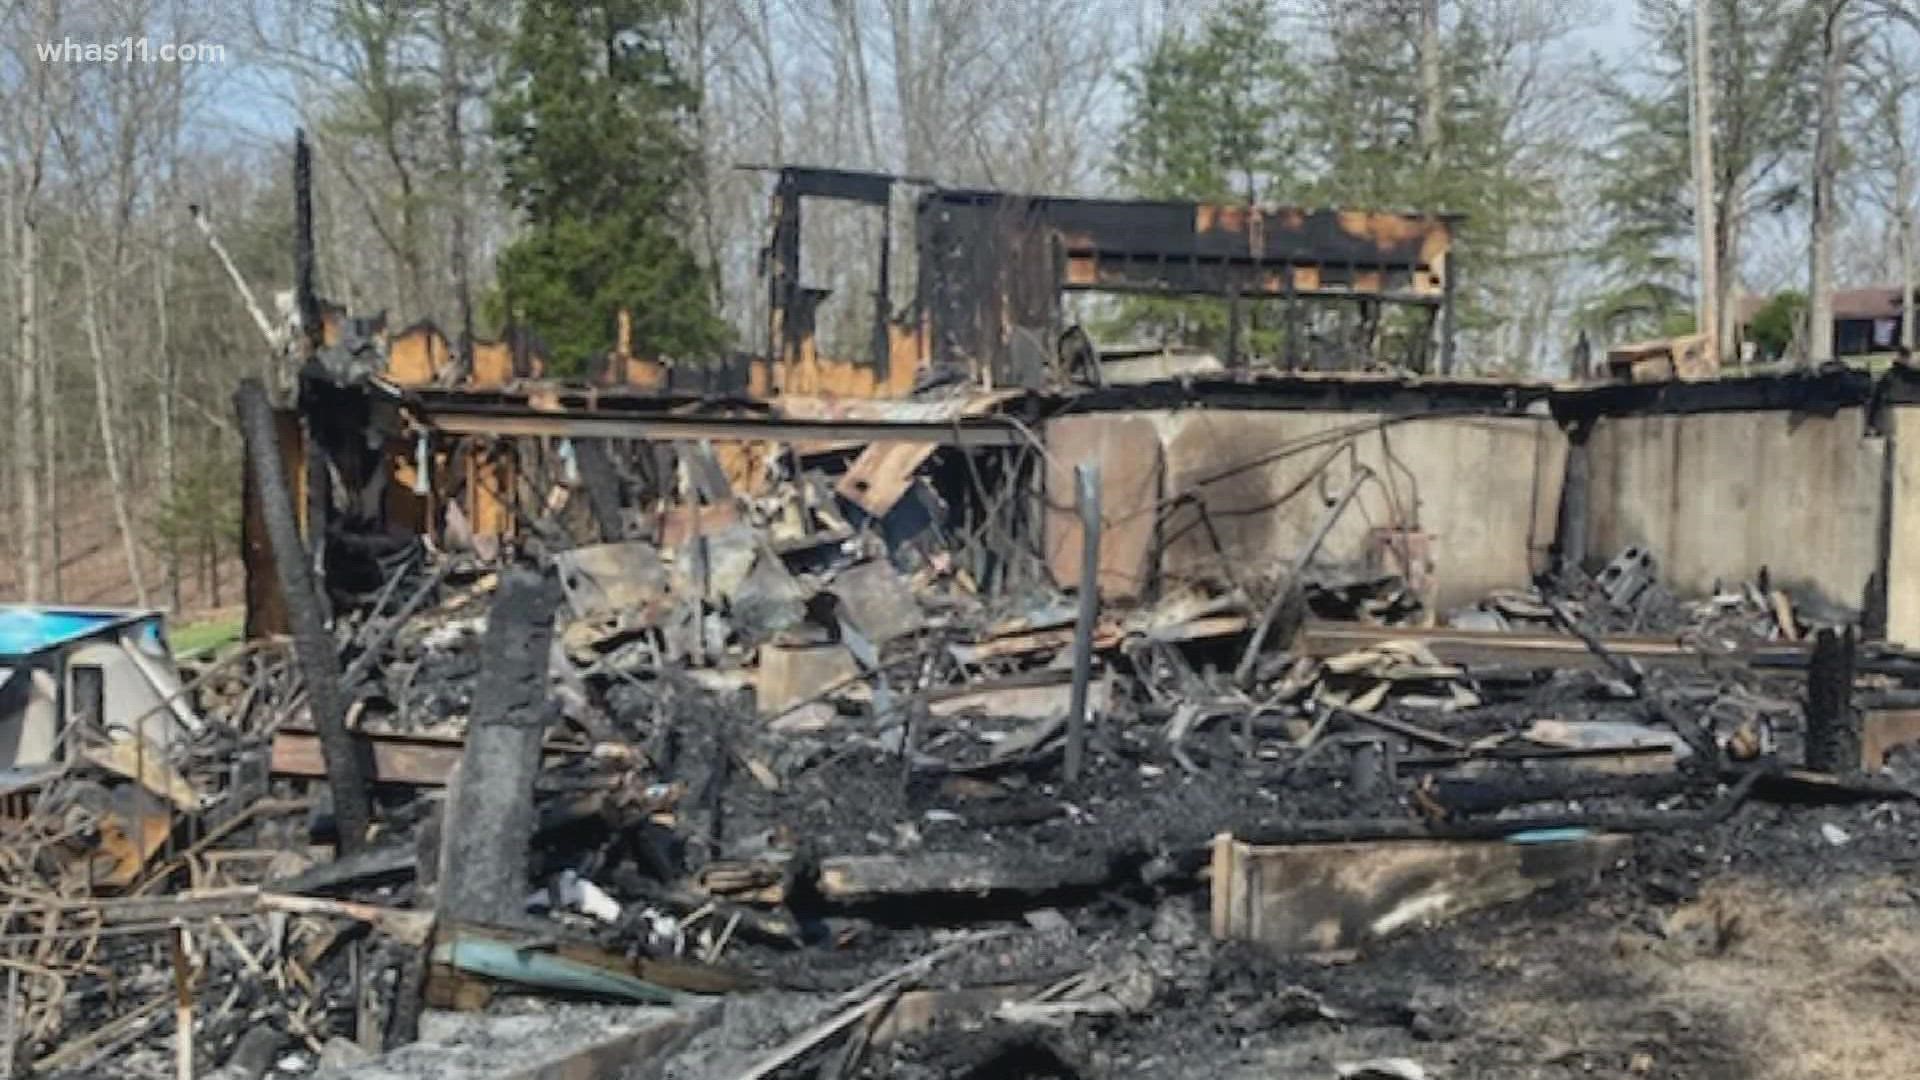 He was out on Thursday helping restore power to those who lost it during Wednesday's storms only to find out, his home was engulfed in flames.